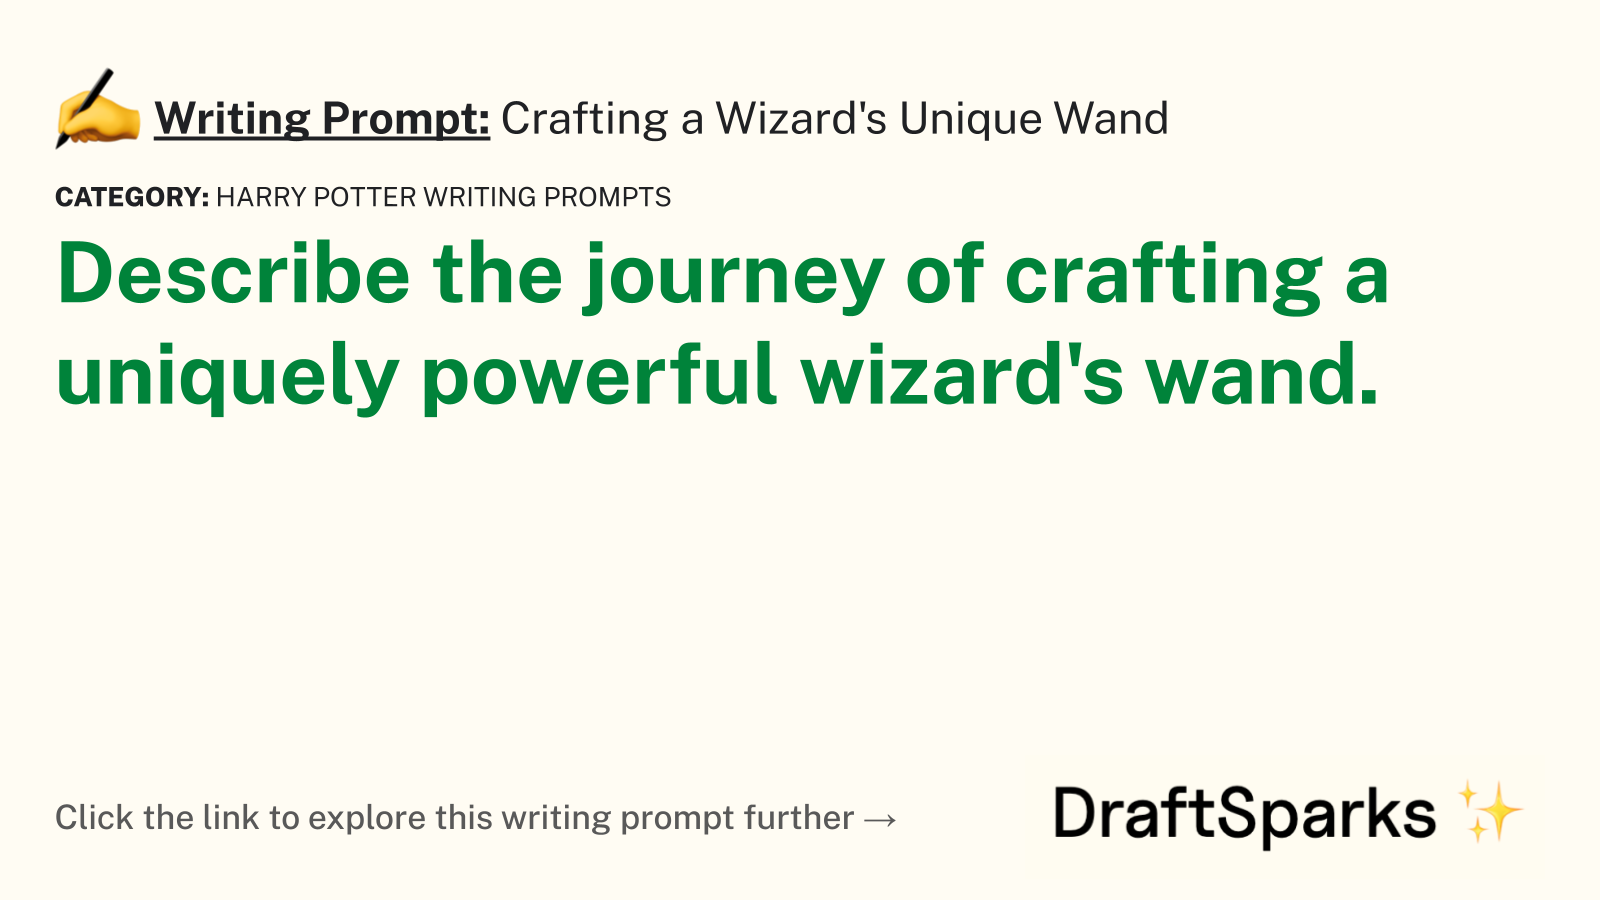 Crafting a Wizard’s Unique Wand